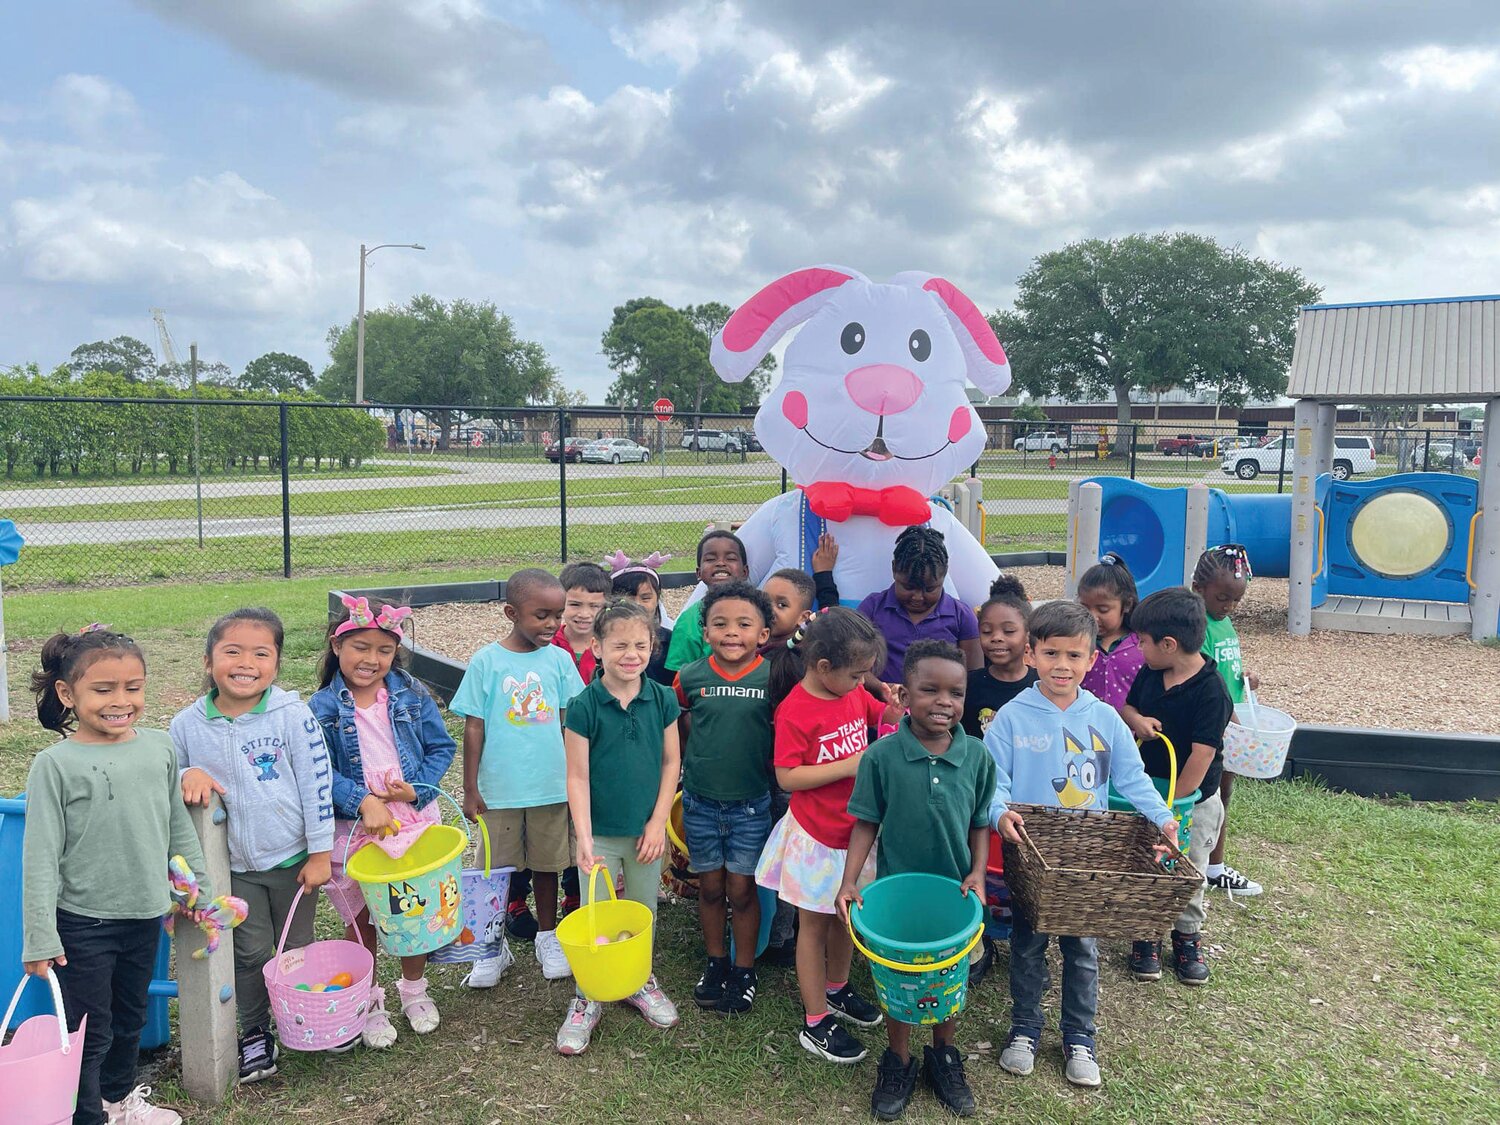 CLEWISTON -- Eastside Elementary School's youngest students enjoyed an Easter Egg Hunt on March 28. [Photo courtesy Eastside Elementary School]